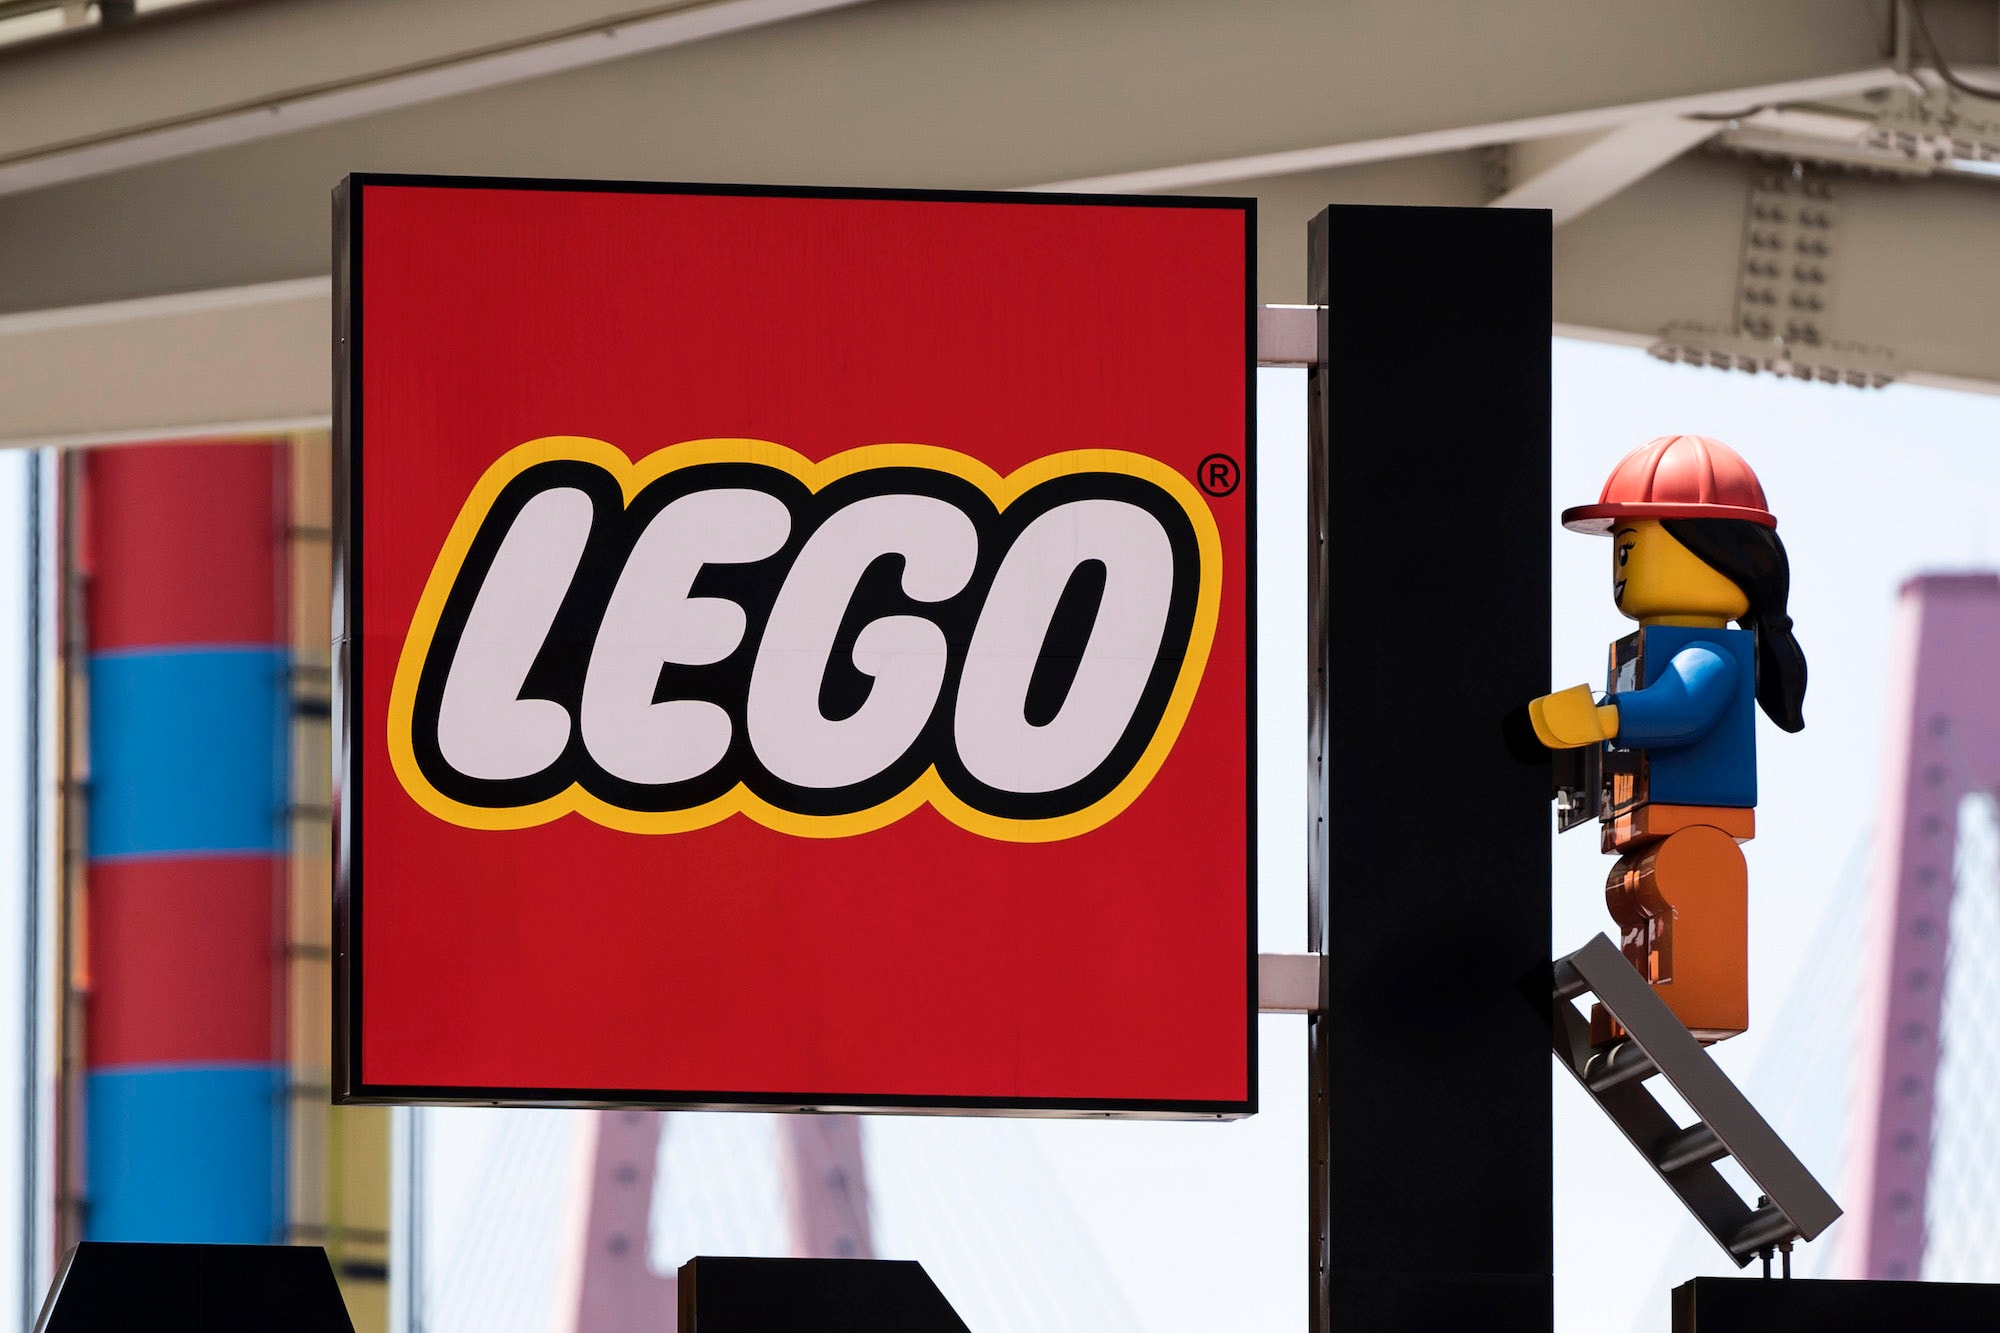 LEGO Donates $4 Million USD Racial Equality Education Black Lives Matter George Floyd Protests